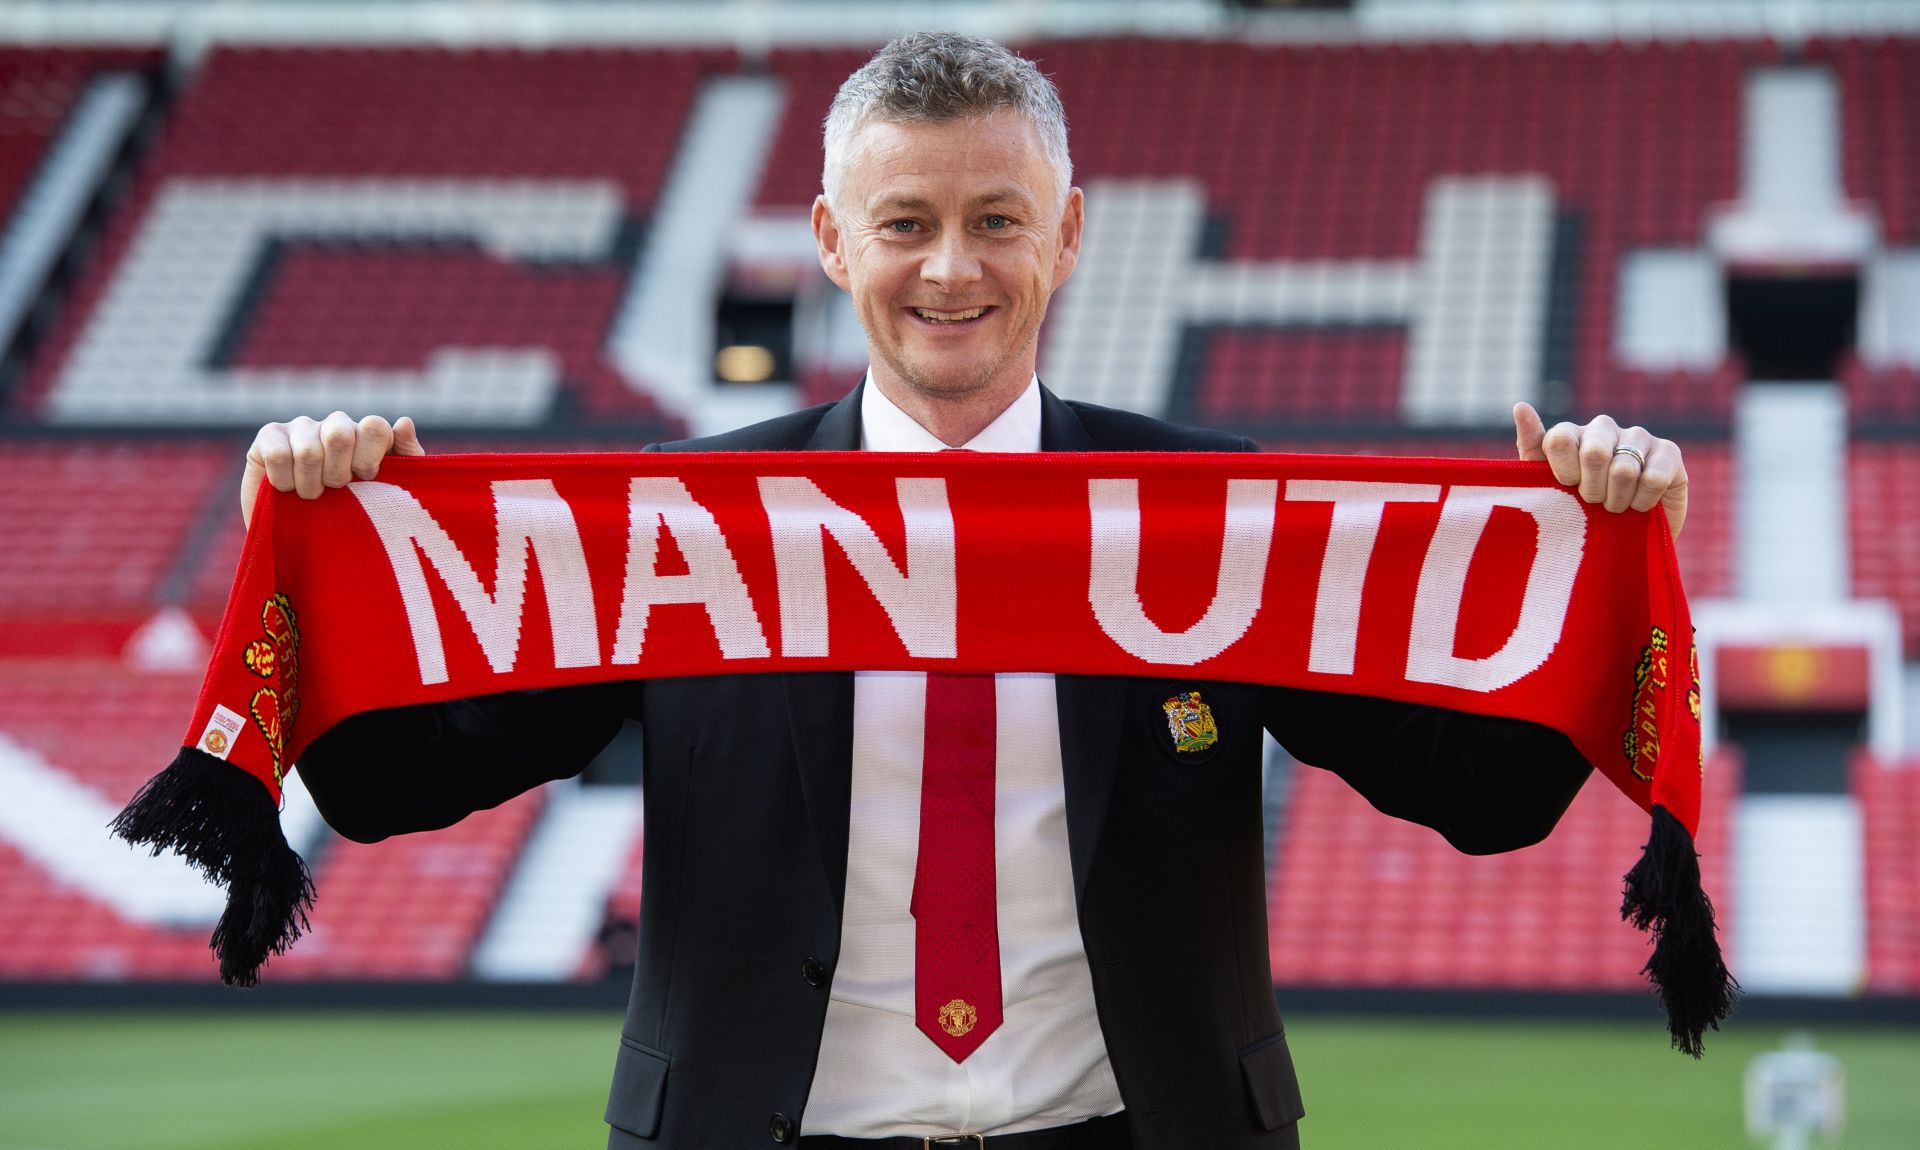 epa07469147 Ole Gunnar Solskjaer holds a scarf pitch side inside Old Trafford after being announced as the new manager of Manchester United  at Old Trafford, Manchester, Britain, 28 March 2019.  EPA/PETER POWELL EDITORIAL USE ONLY. No use with unauthorized audio, video, data, fixture lists, club/league logos or 'live' services. Online in-match use limited to 120 images, no video emulation. No use in betting, games or single club/league/player publications